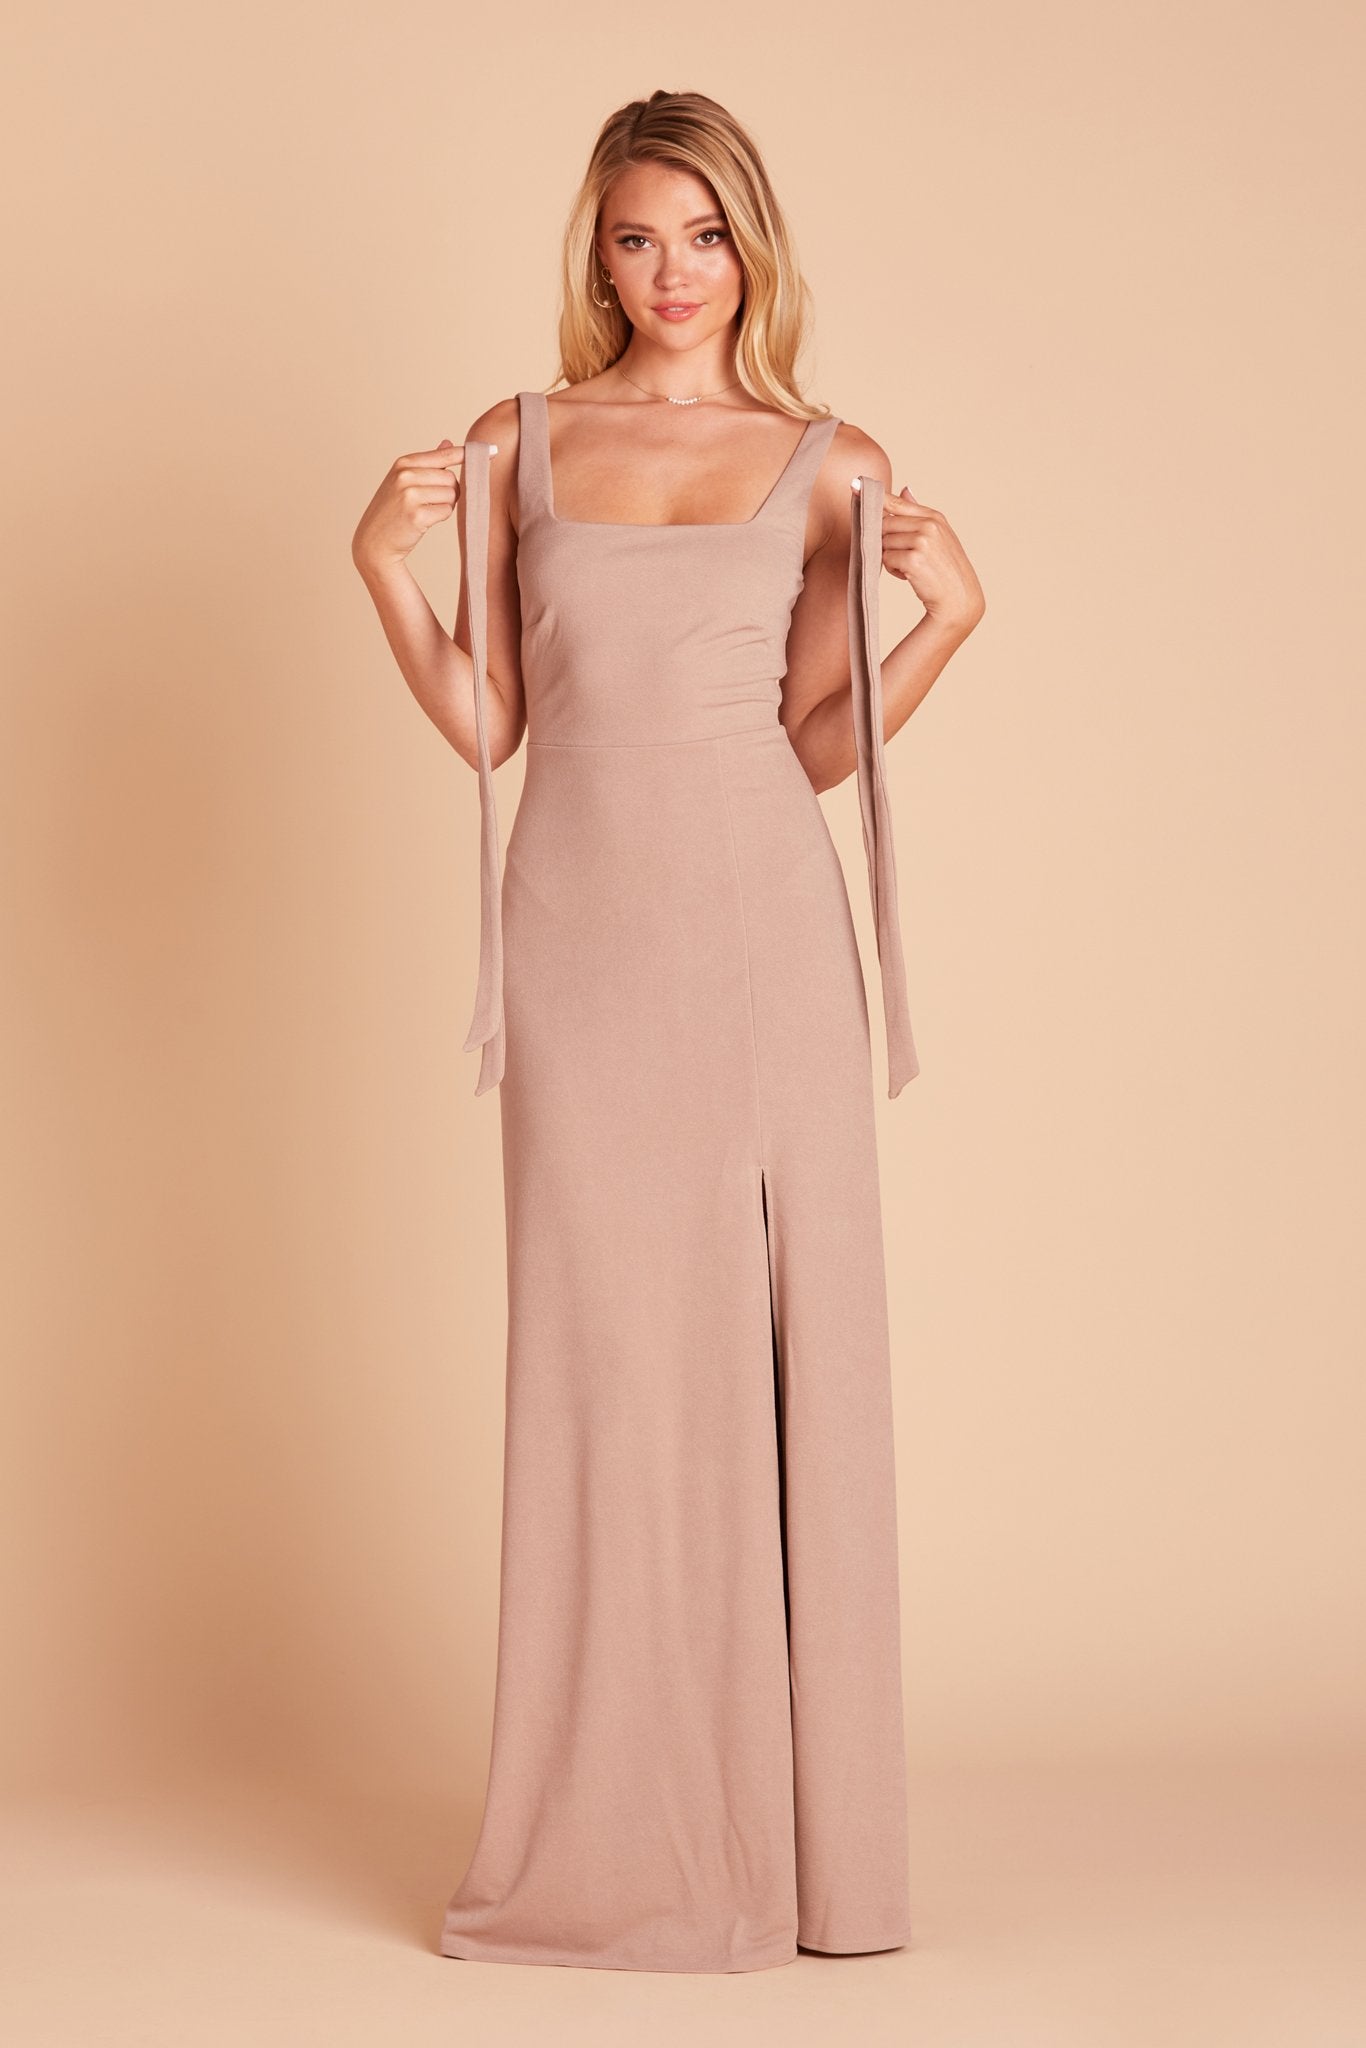 Front view of the Alex Convertible Dress in taupe as the model holds up the removable shoulder ties in each hand, letting them drape down to show their length from shoulder to hip height. 